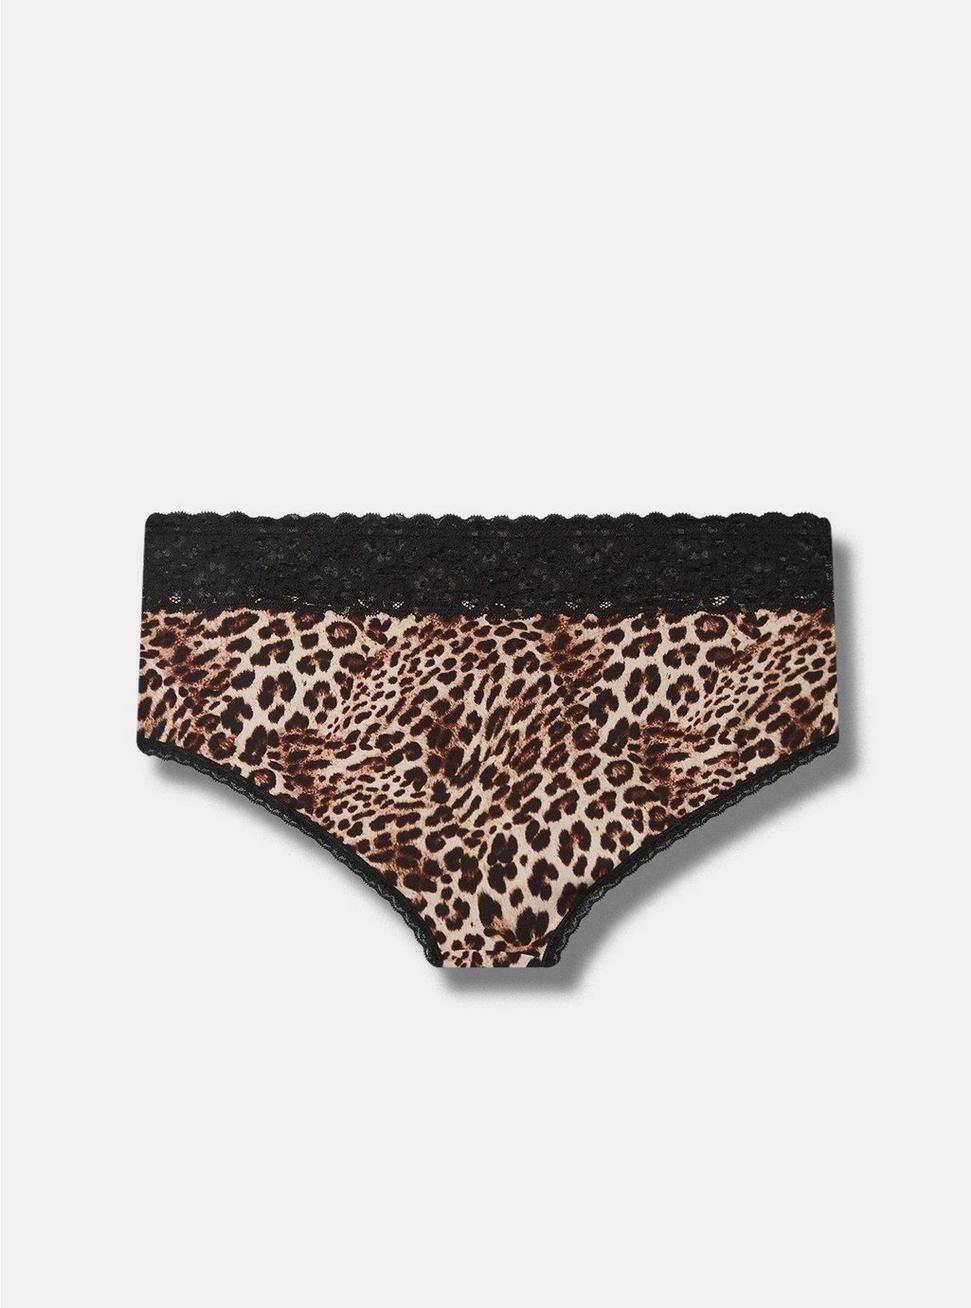 Cotton Mid-Rise Cheeky Lace Trim Panty, CLASSIC LEOPARD SANDSHELL, alternate